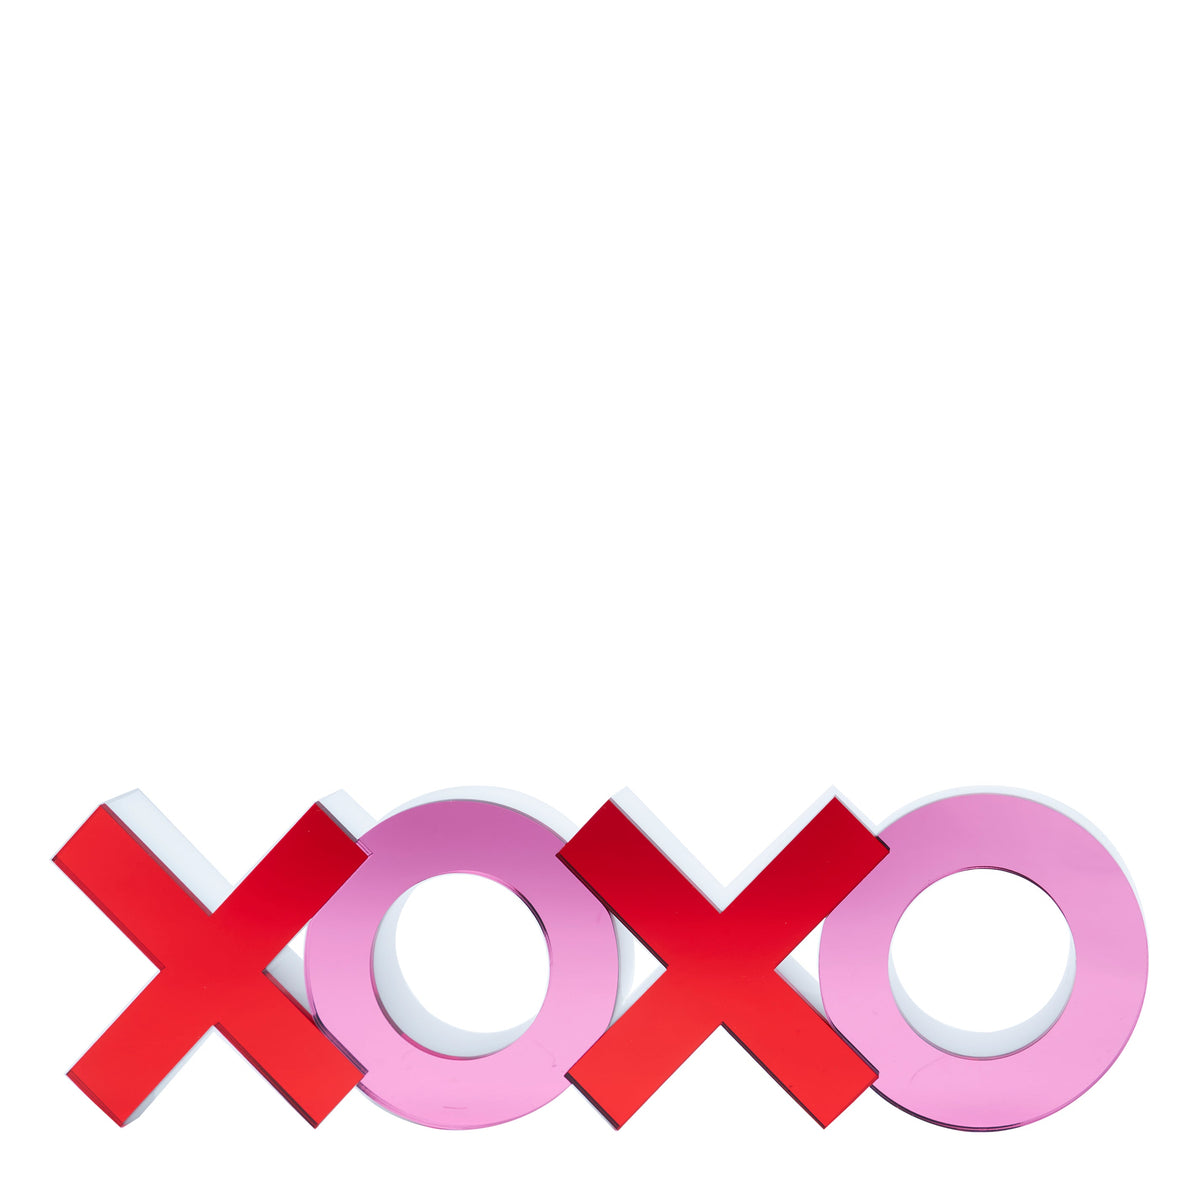 Shelf Decor Stand Alone XOXO Mirrored Red & Pink 6.5 inches length